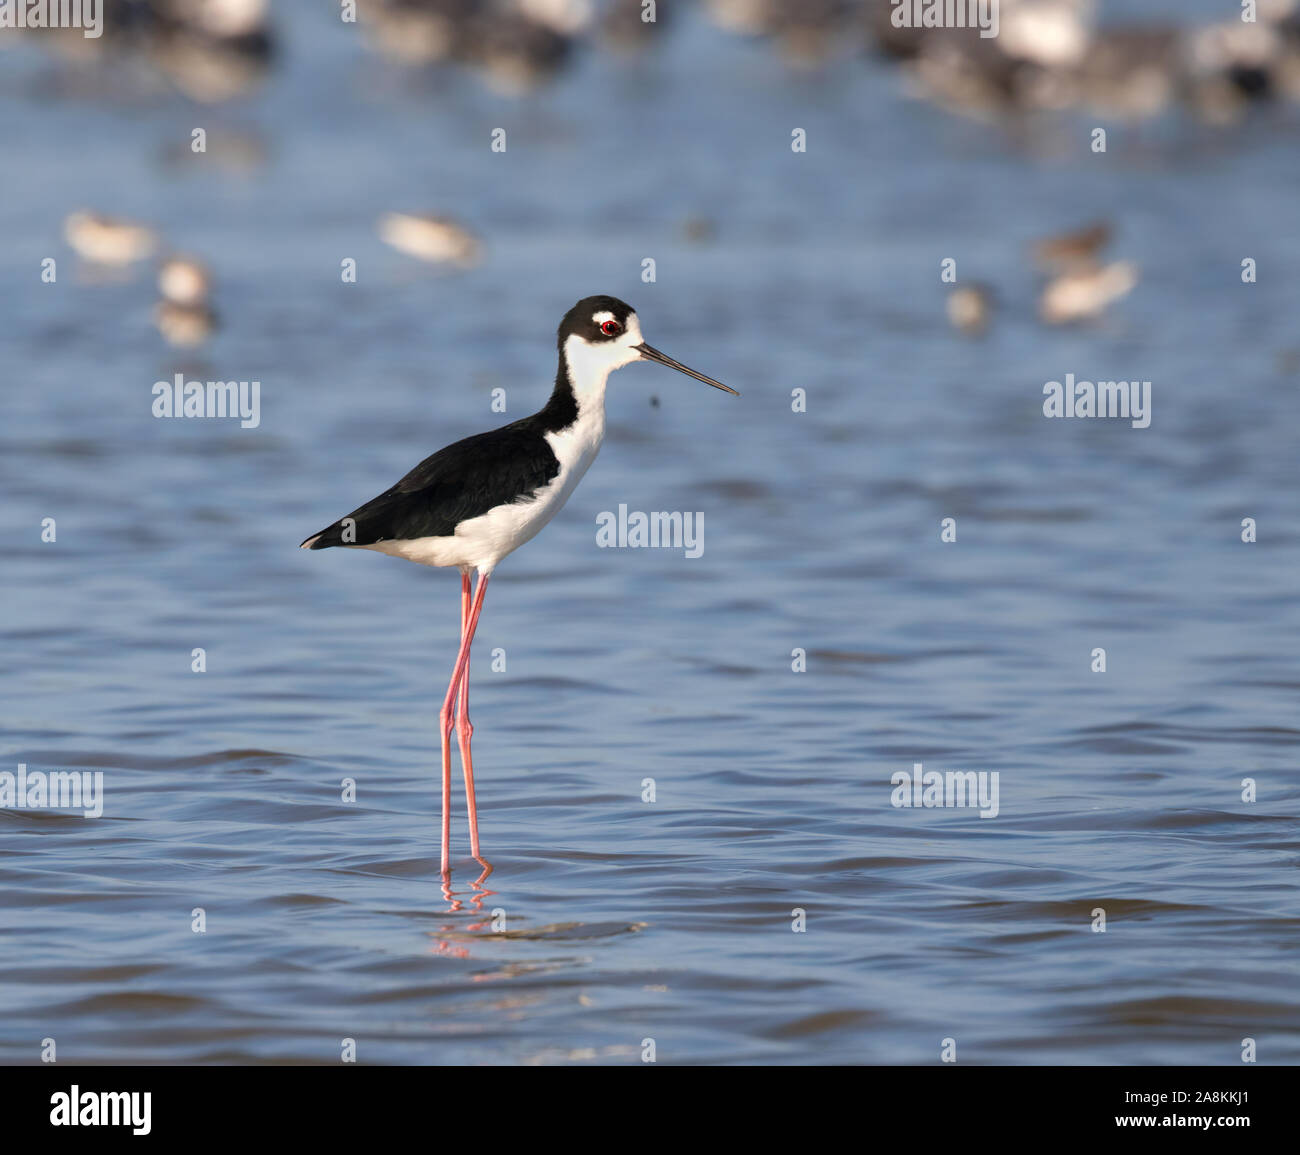 The black-necked stilts (Himantopus mexicanus) on the blue water background, Galveston, Texas, USA. Stock Photo